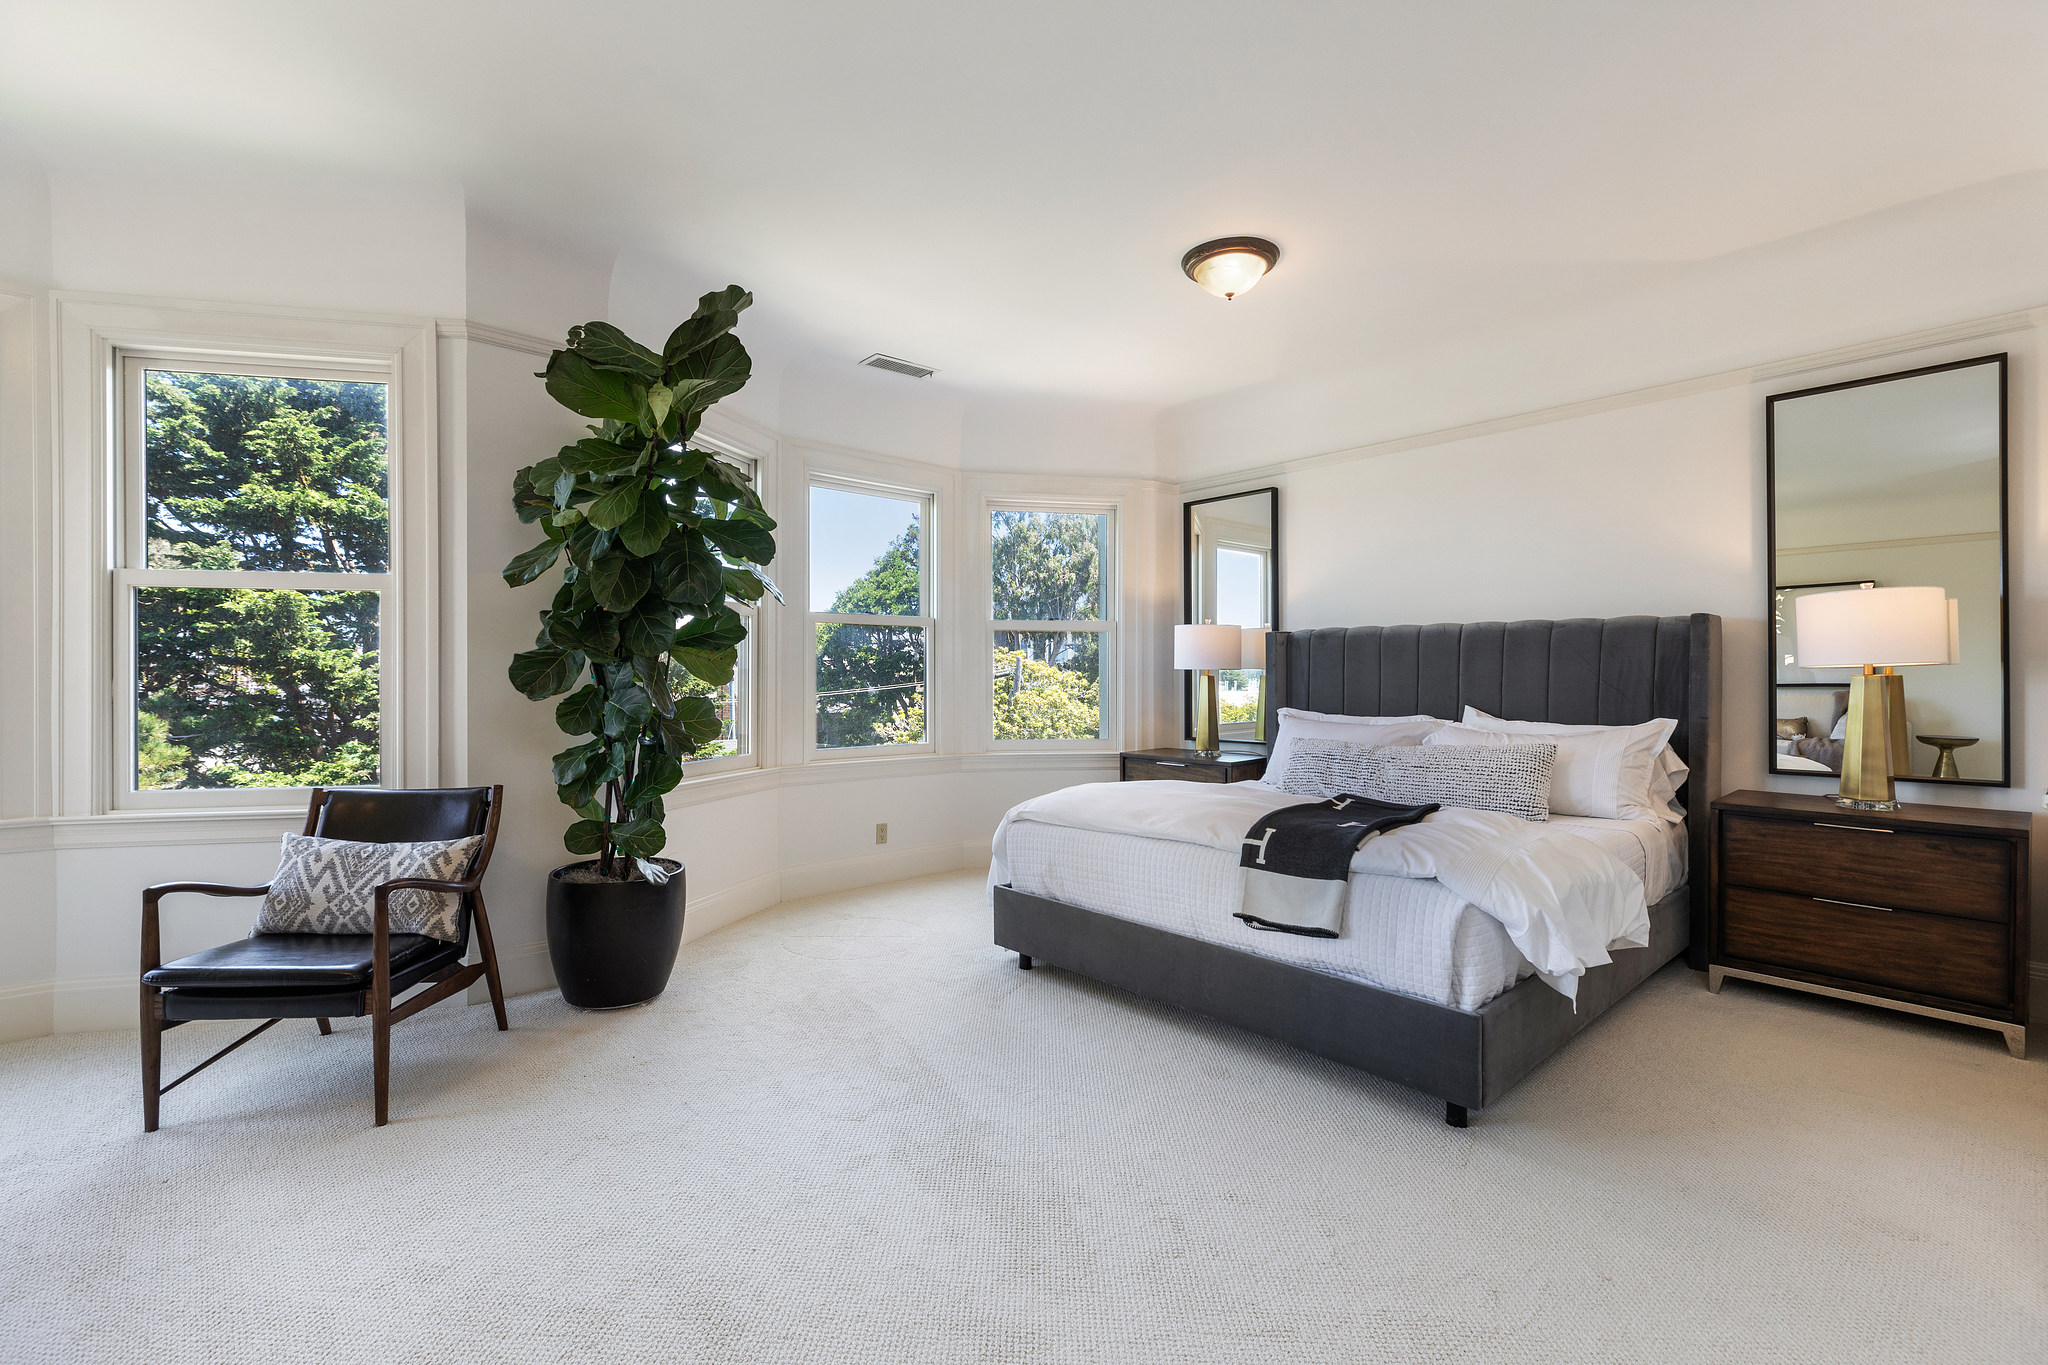 Property Photo: Bedroom with carpet and bay windows